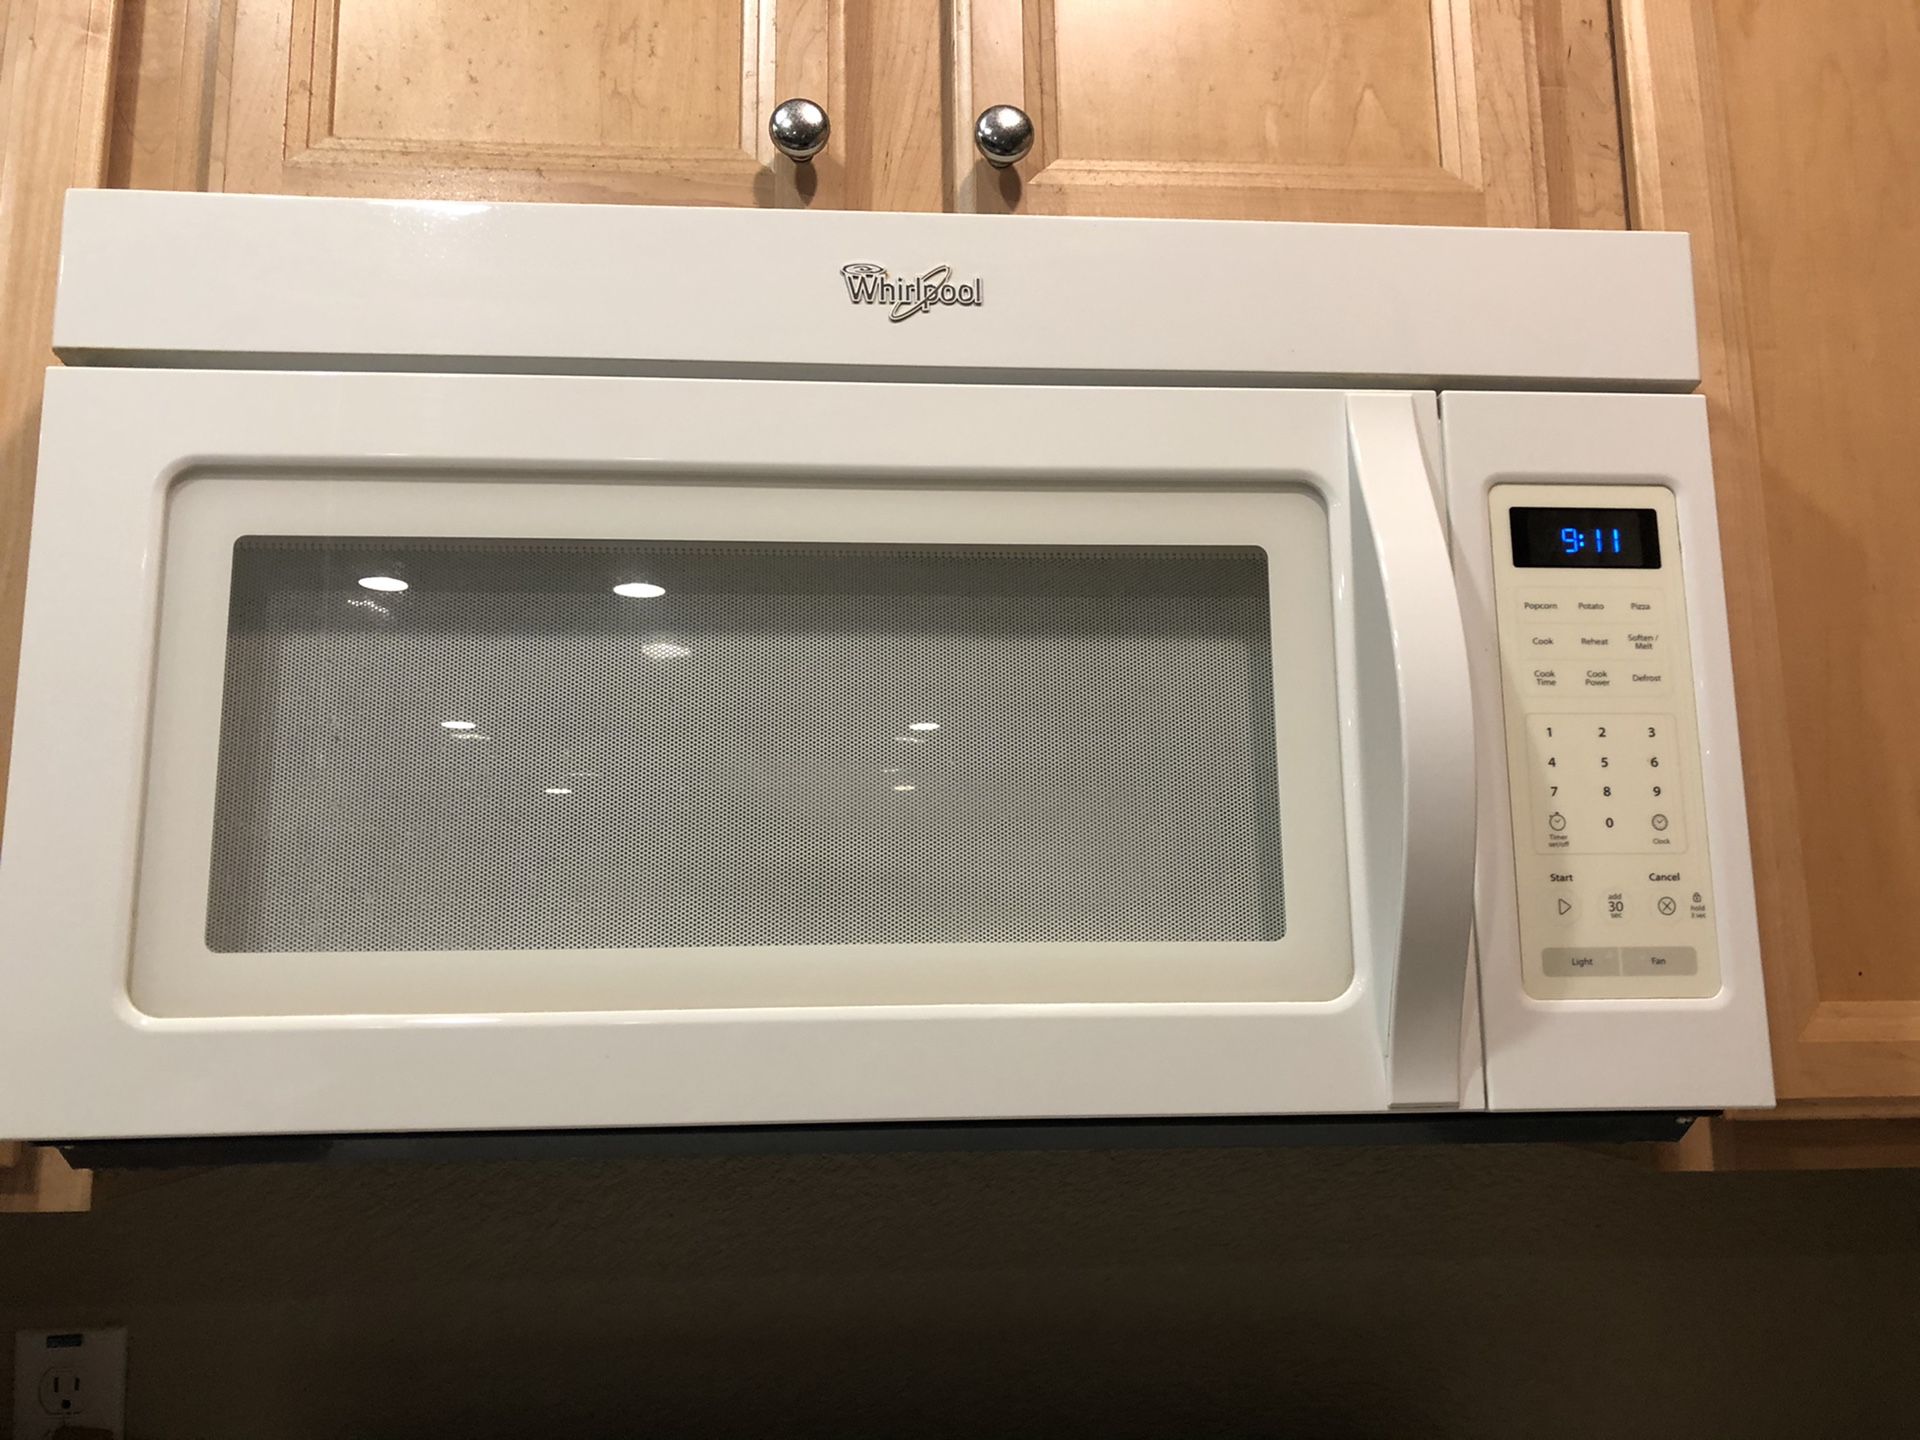 Whirlpool microwave above the range with vent